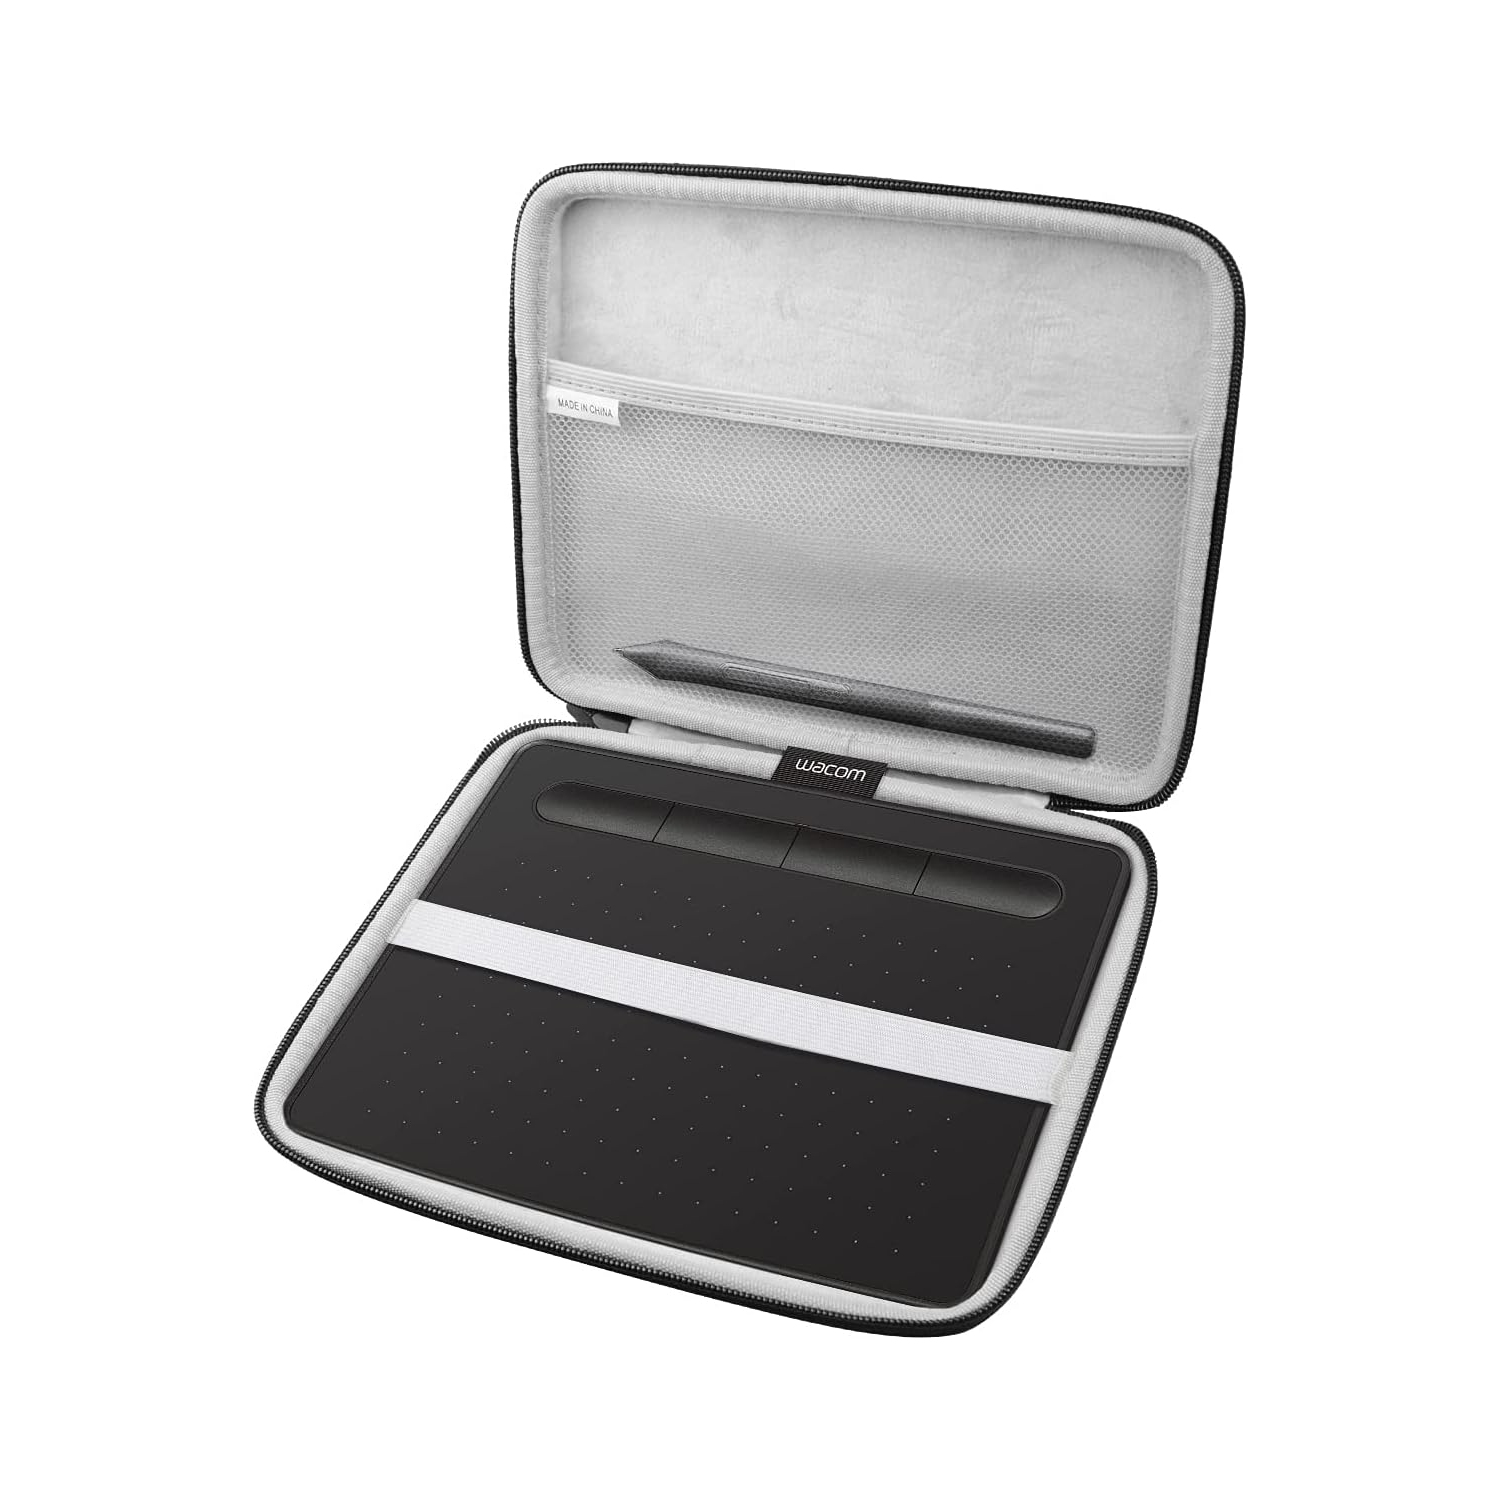 Hard Travel Case Bag for Wacom Intuos CTL490DW / CTL490DB / CTL4100WLK0 Draw Graphics Tablet Small by